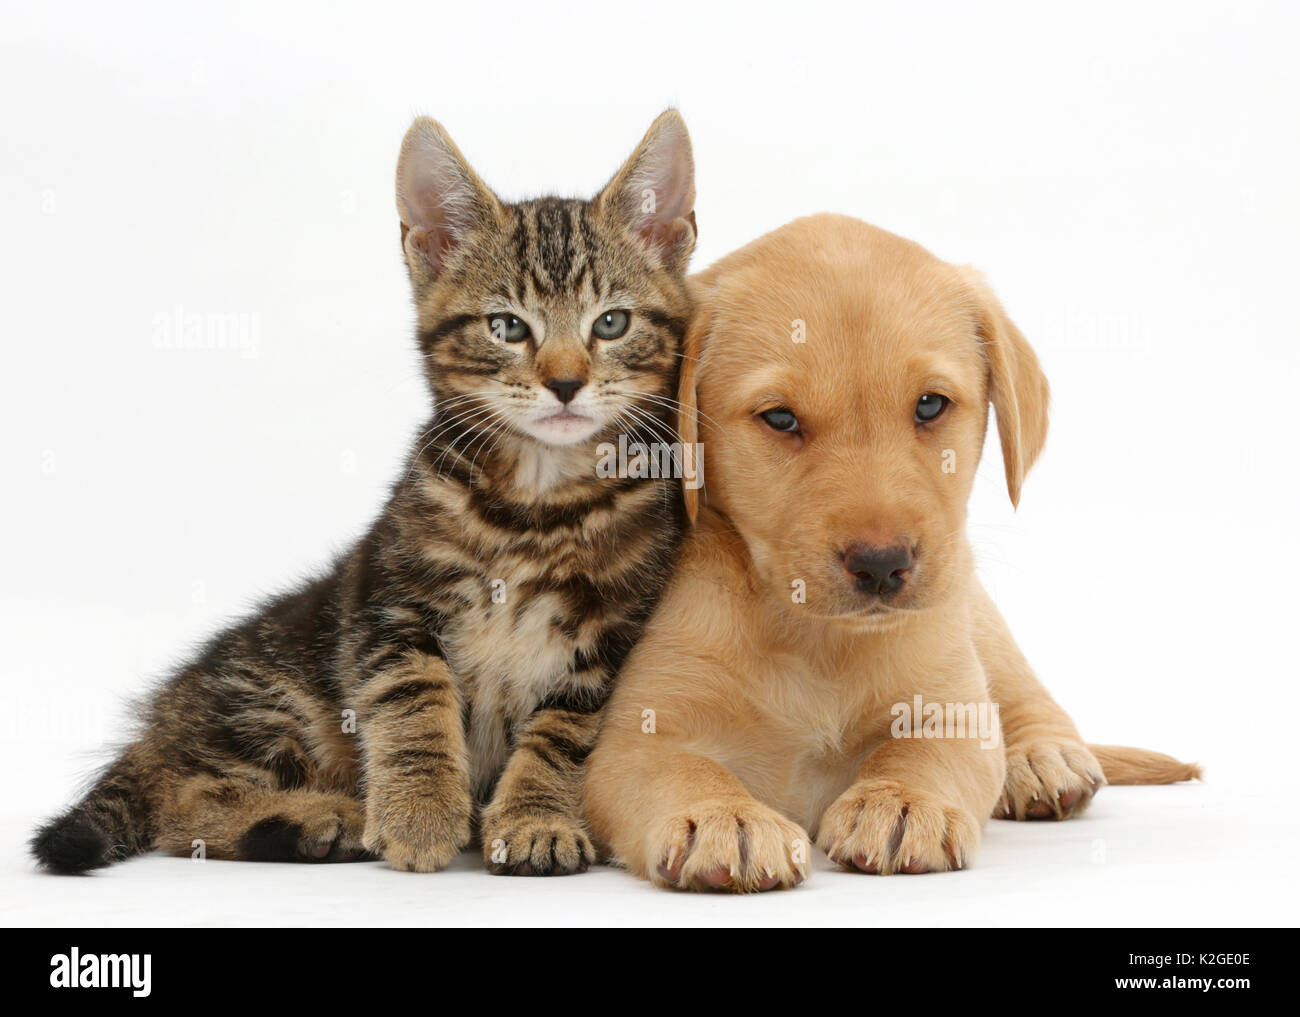 Tabby kitten, Picasso, 9 semaines, avec Yellow labrador, chiot, 8 semaines. Banque D'Images